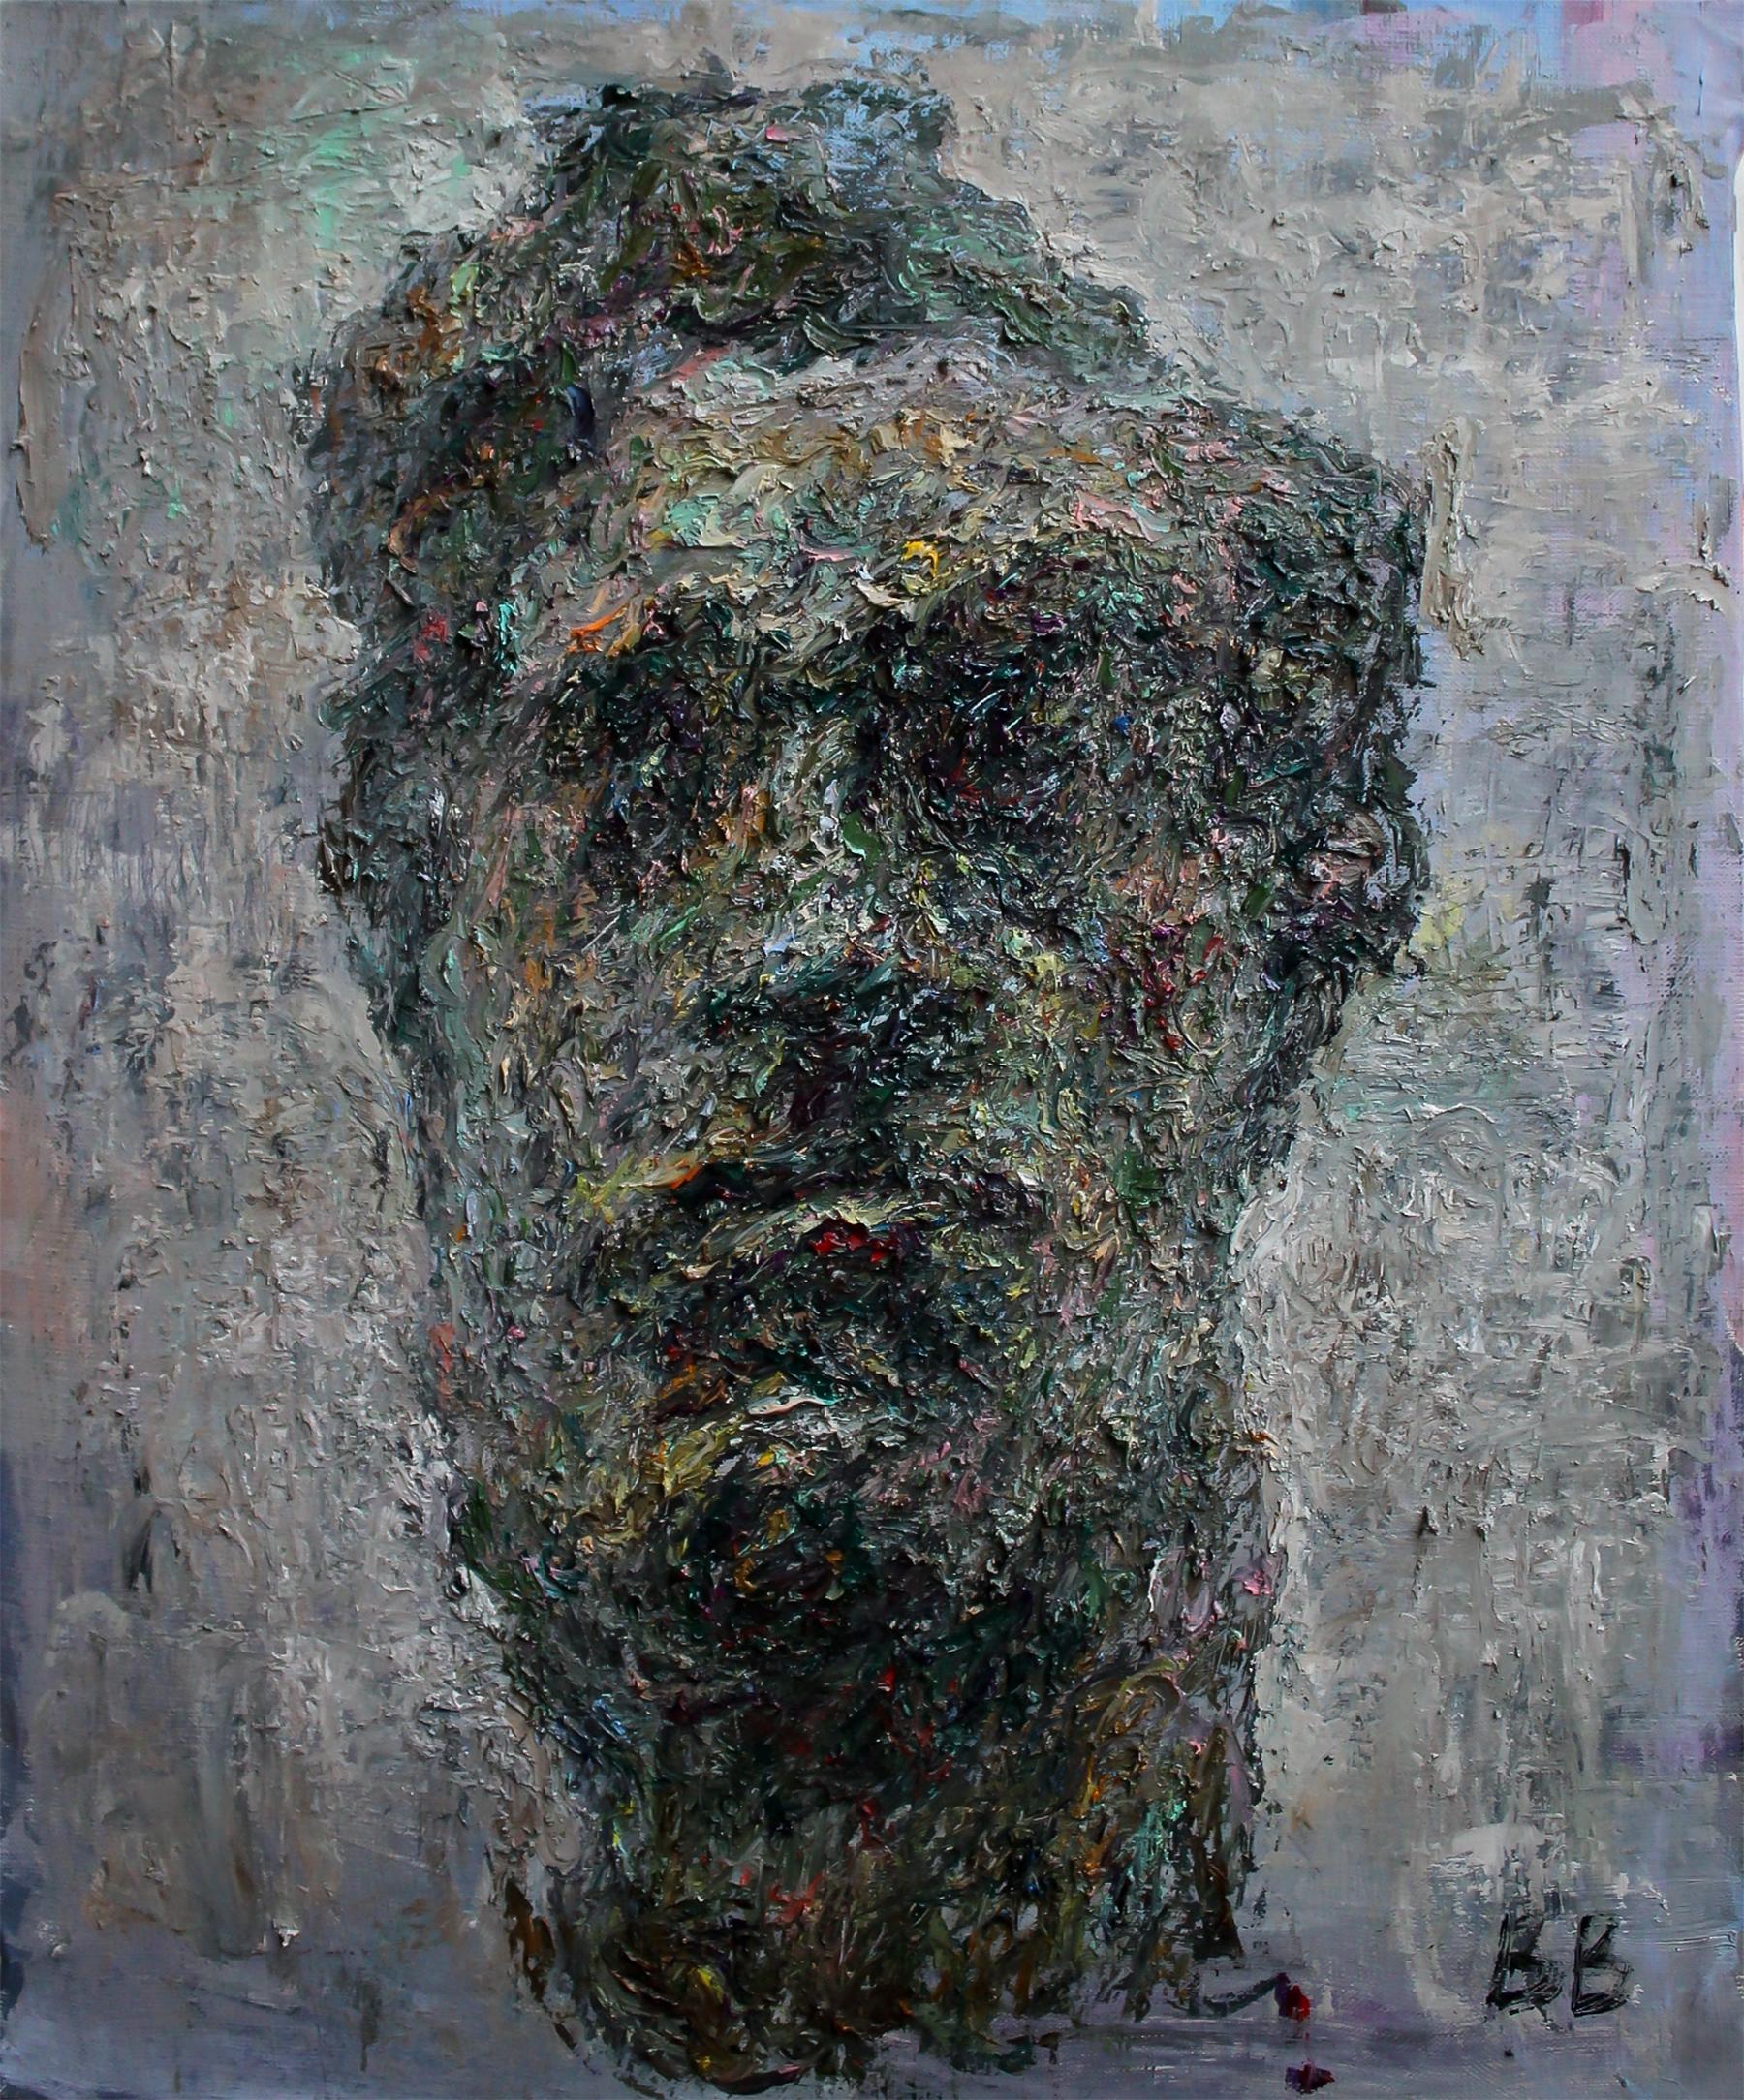 Varvara Vyborova Portrait Painting - Study of a Bourdelle's Sculpture Beethoven - 21st Century Contemporary Painting